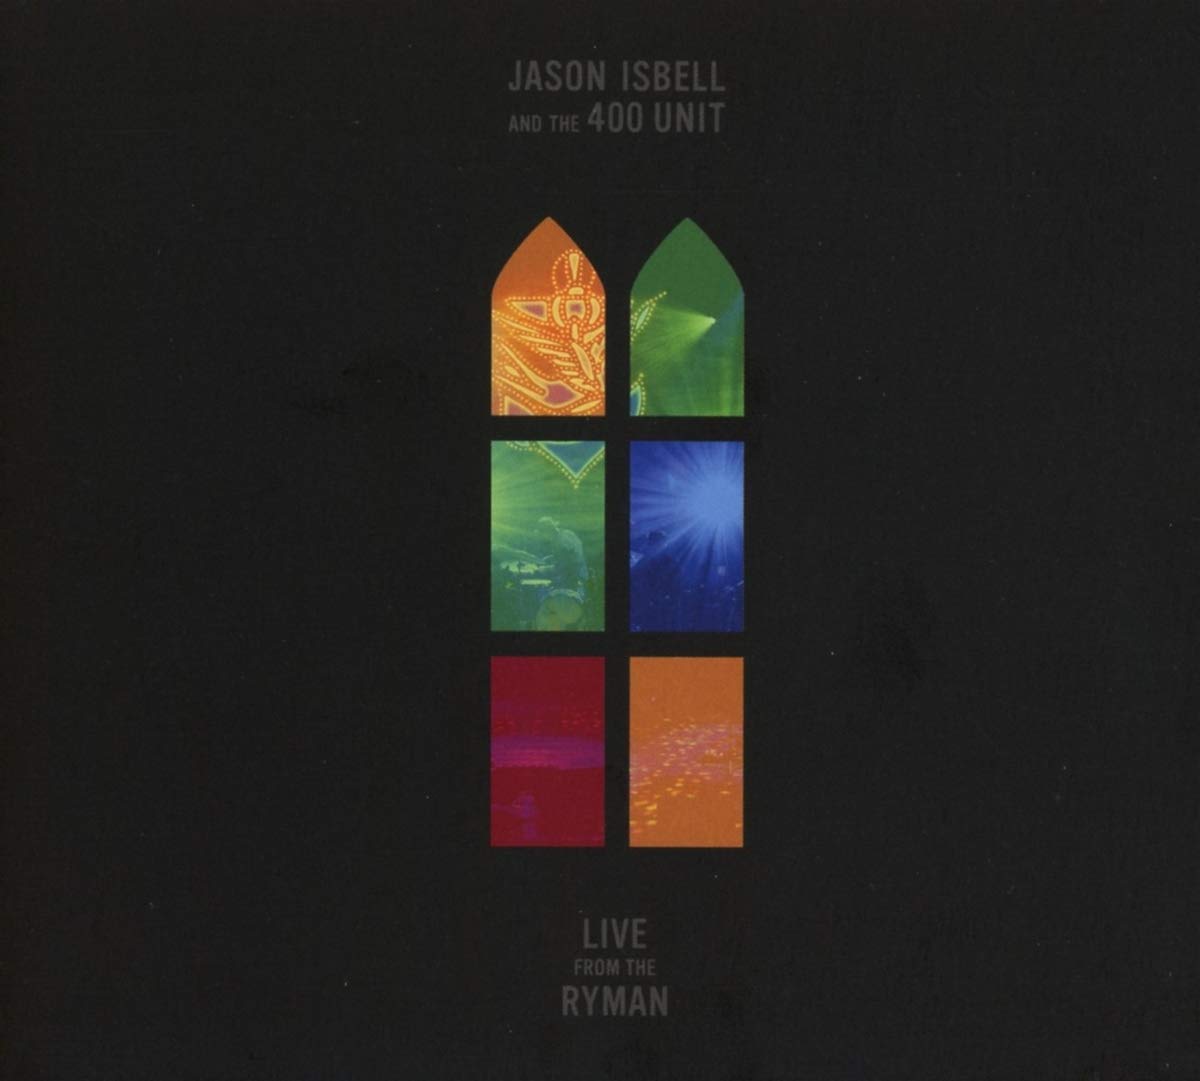 jason-isbell-and-the-400-unit-live-from-the-ryman-vinyl-record-album-1